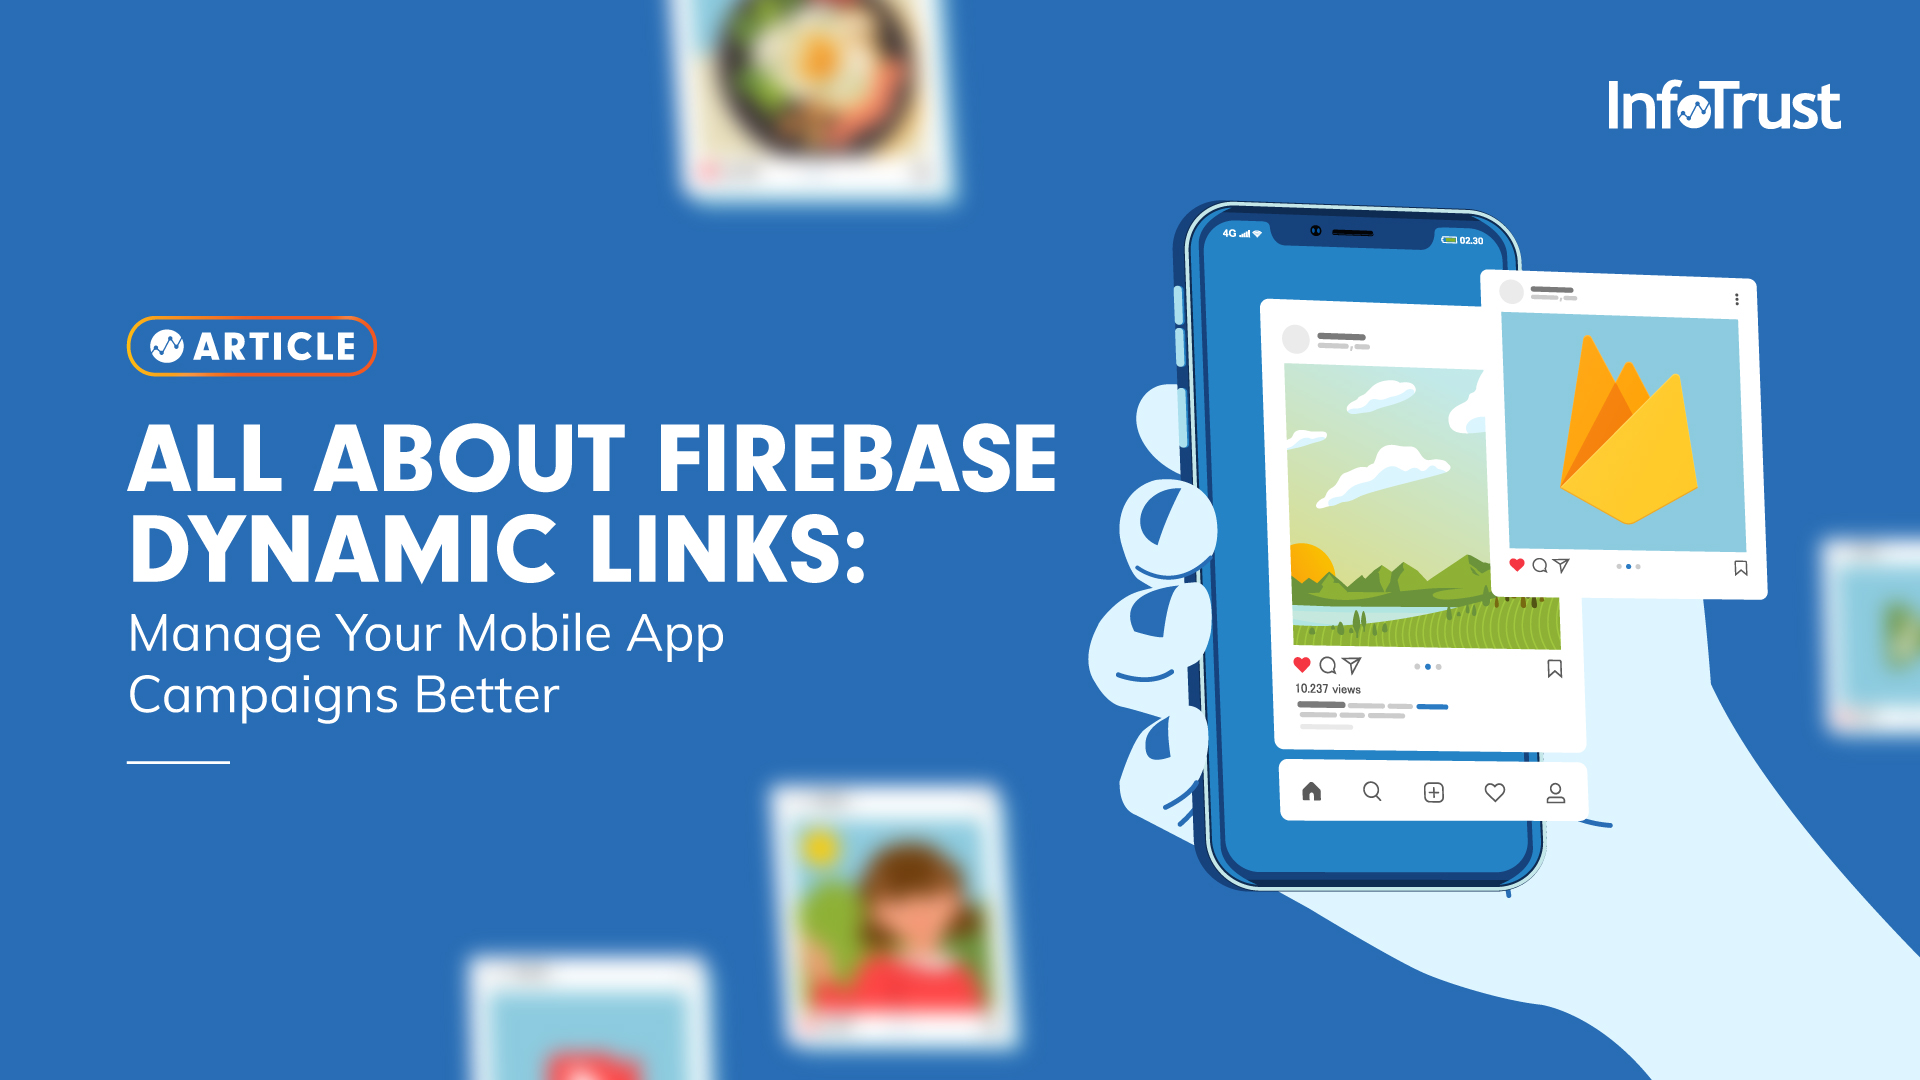 All About Firebase Dynamic Links - Manage Your Mobile App Campaigns Better